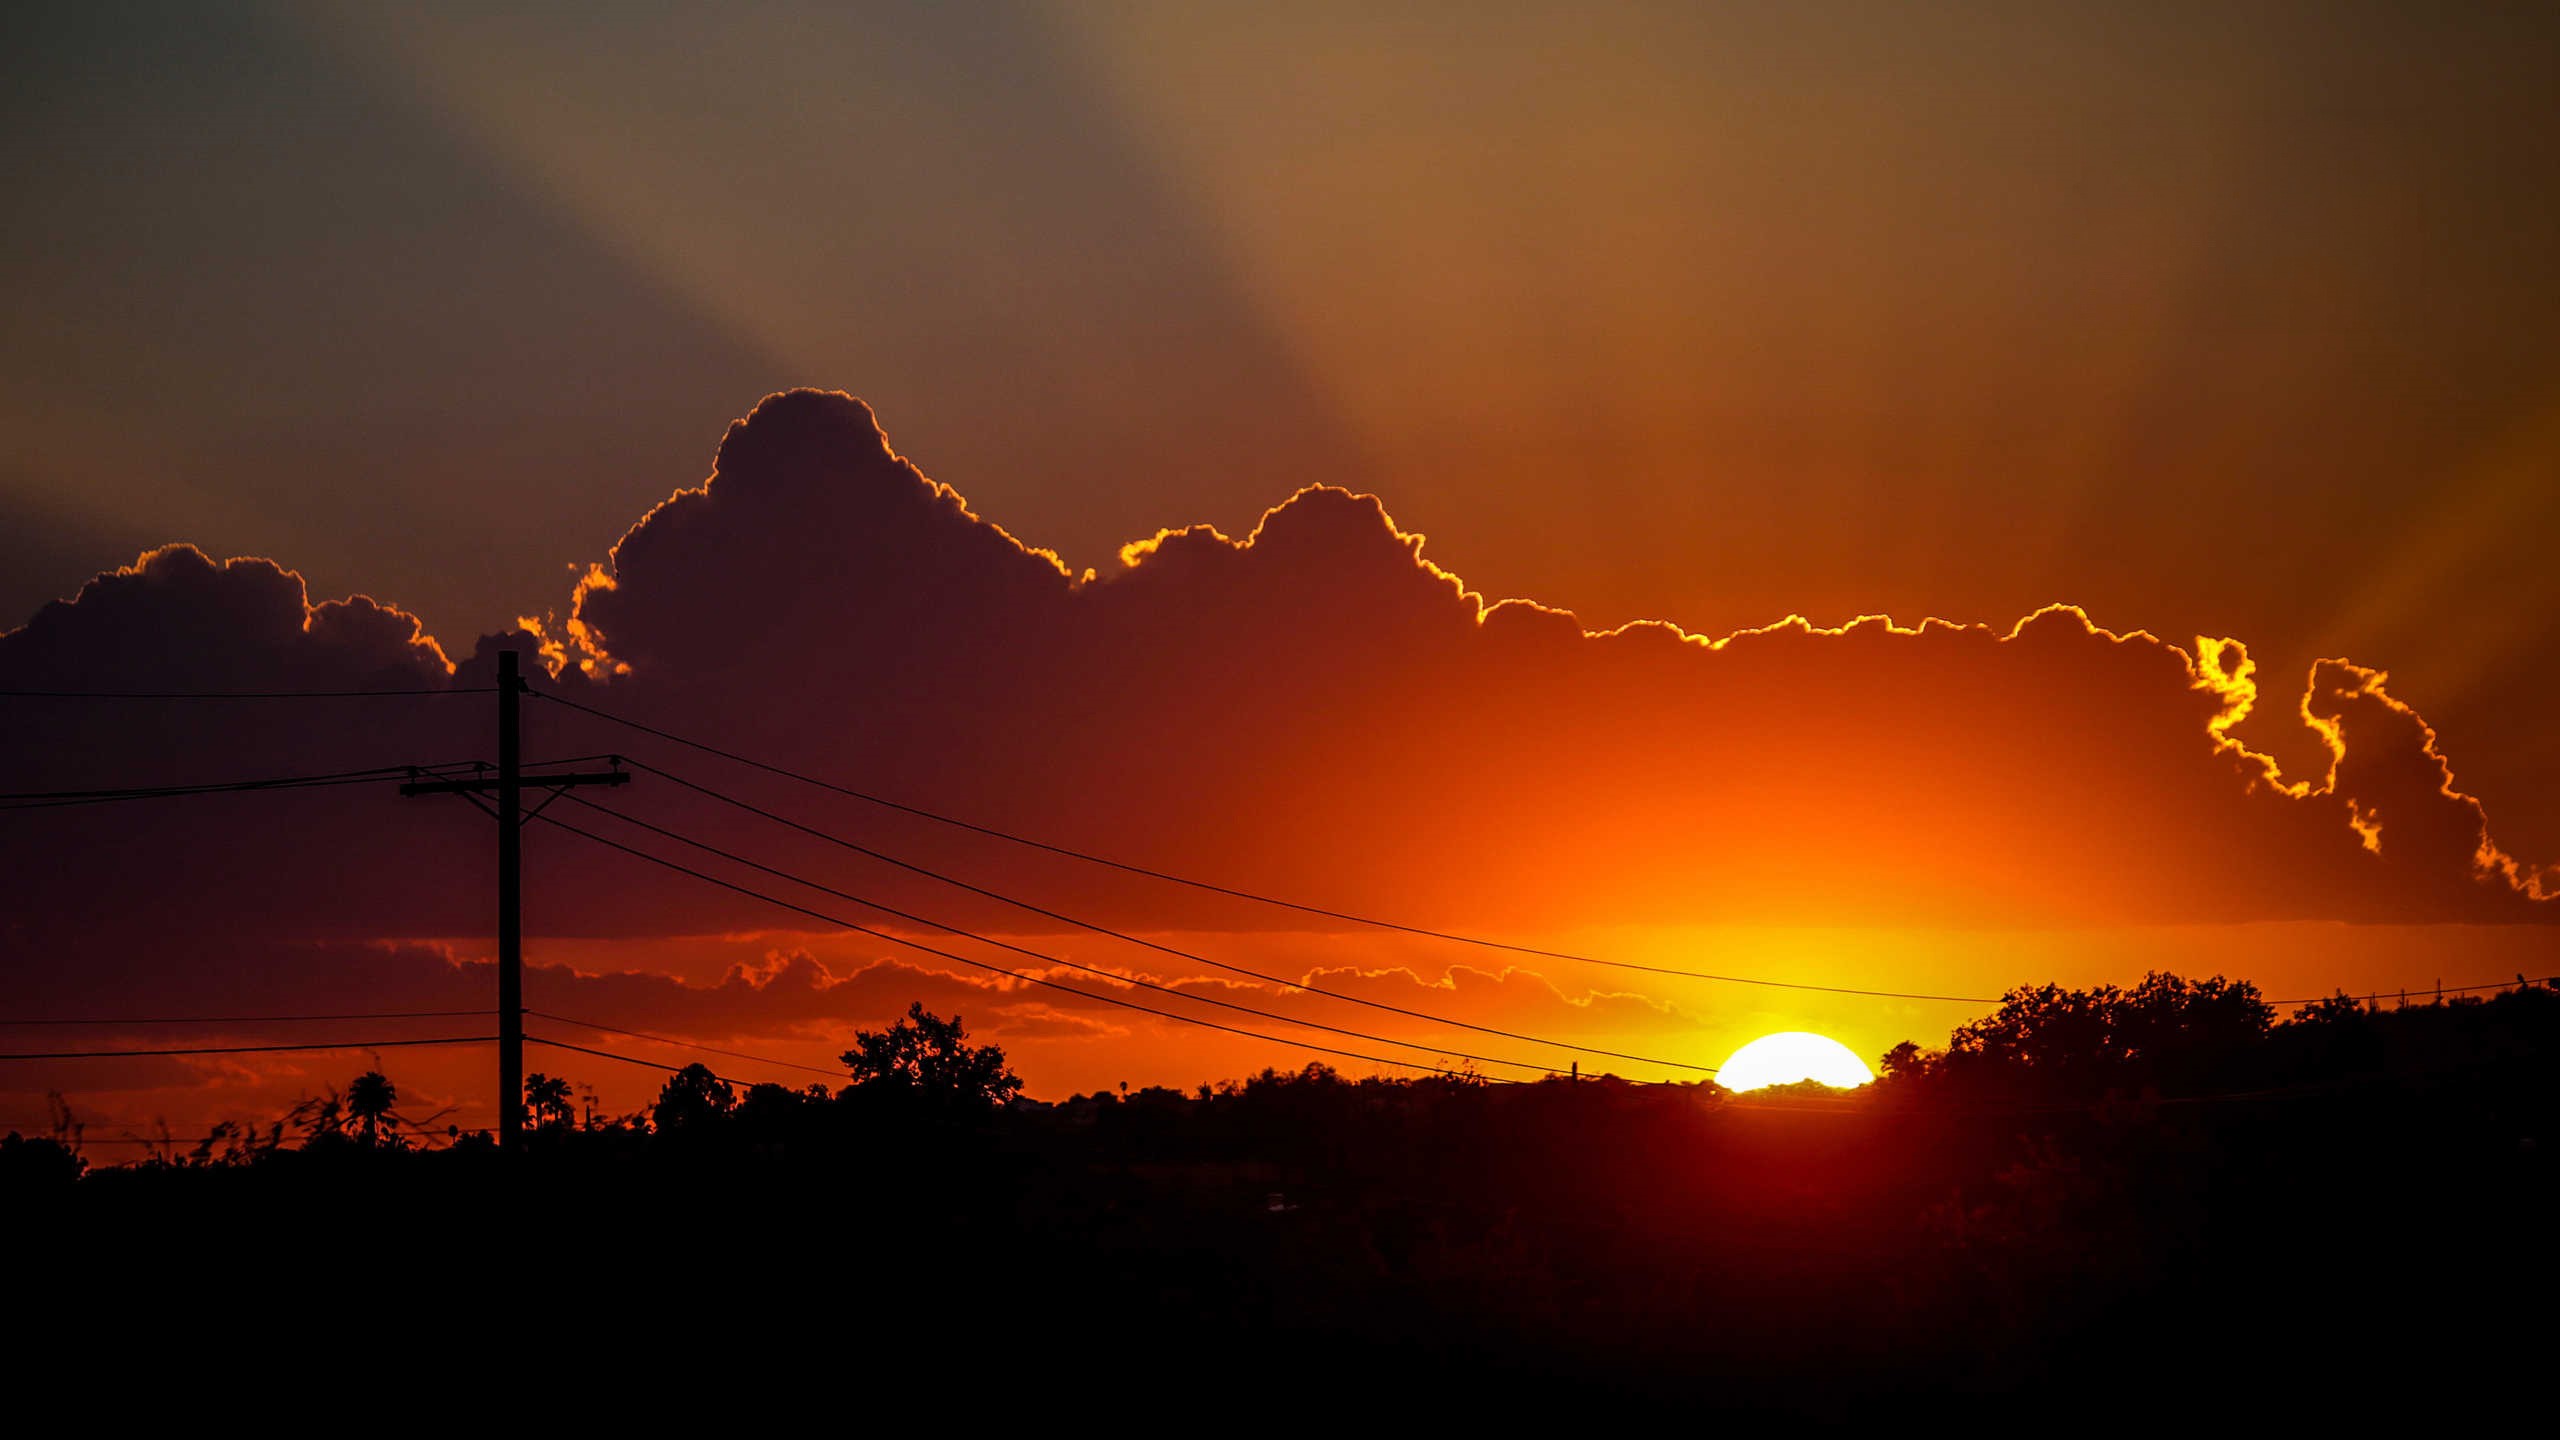 electrical power lines are shown against a sunset